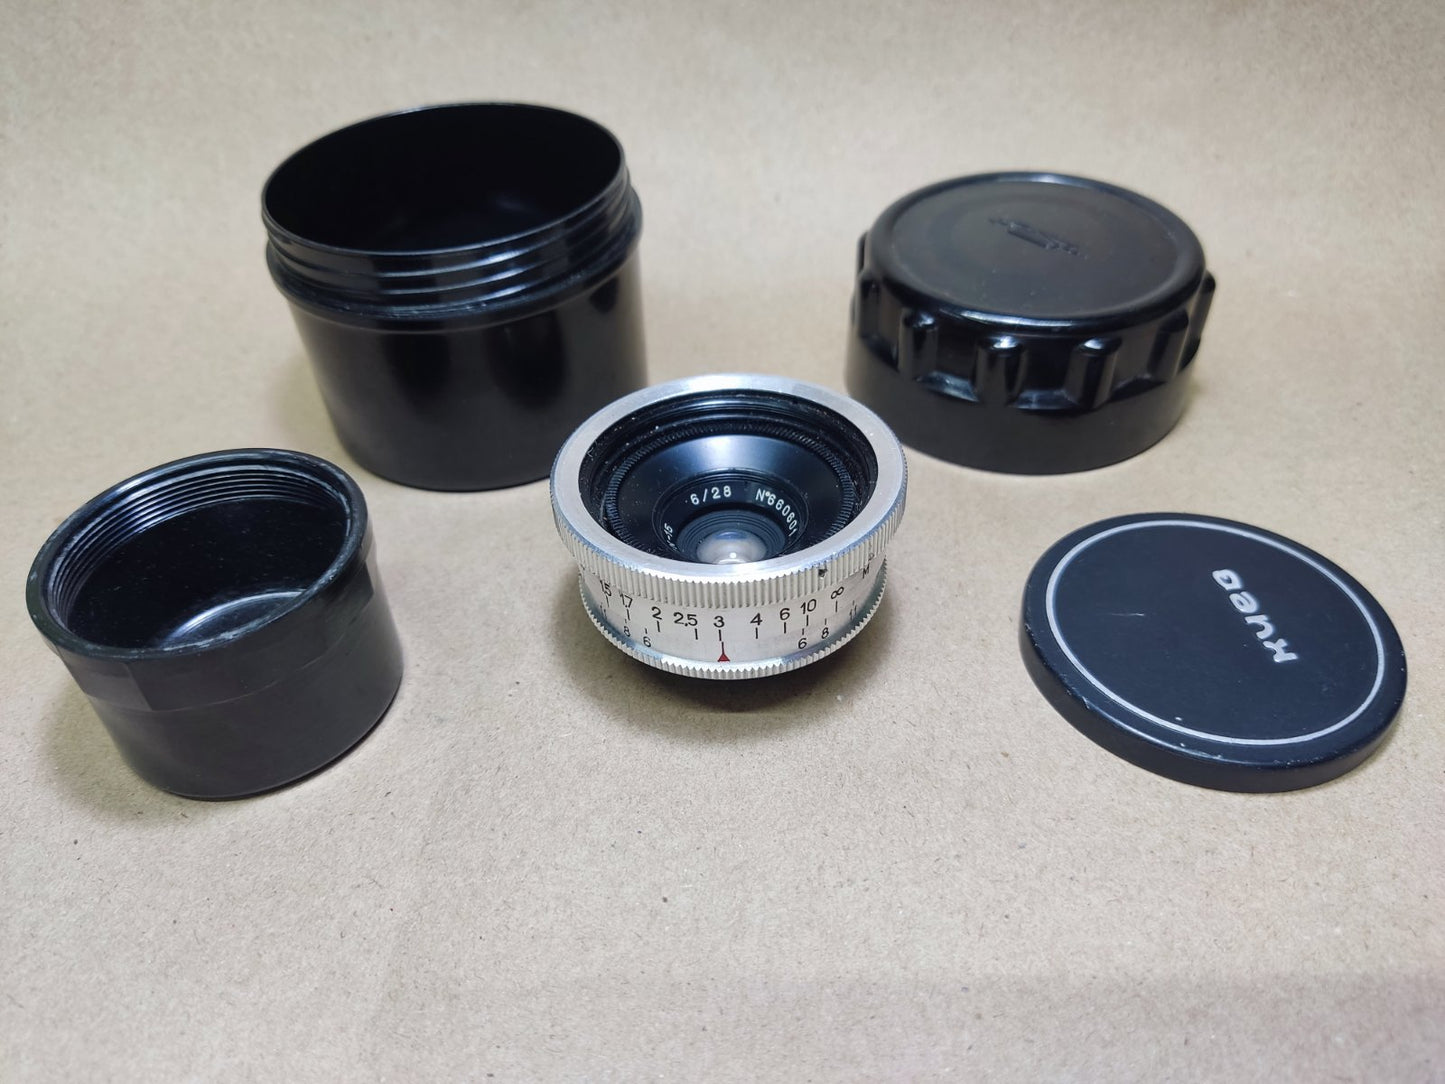 Very rare Orion-15 28mm f/6 wide angle Lens For LTM M39 Leica RF Mount Carl Zeiss Topogon copy